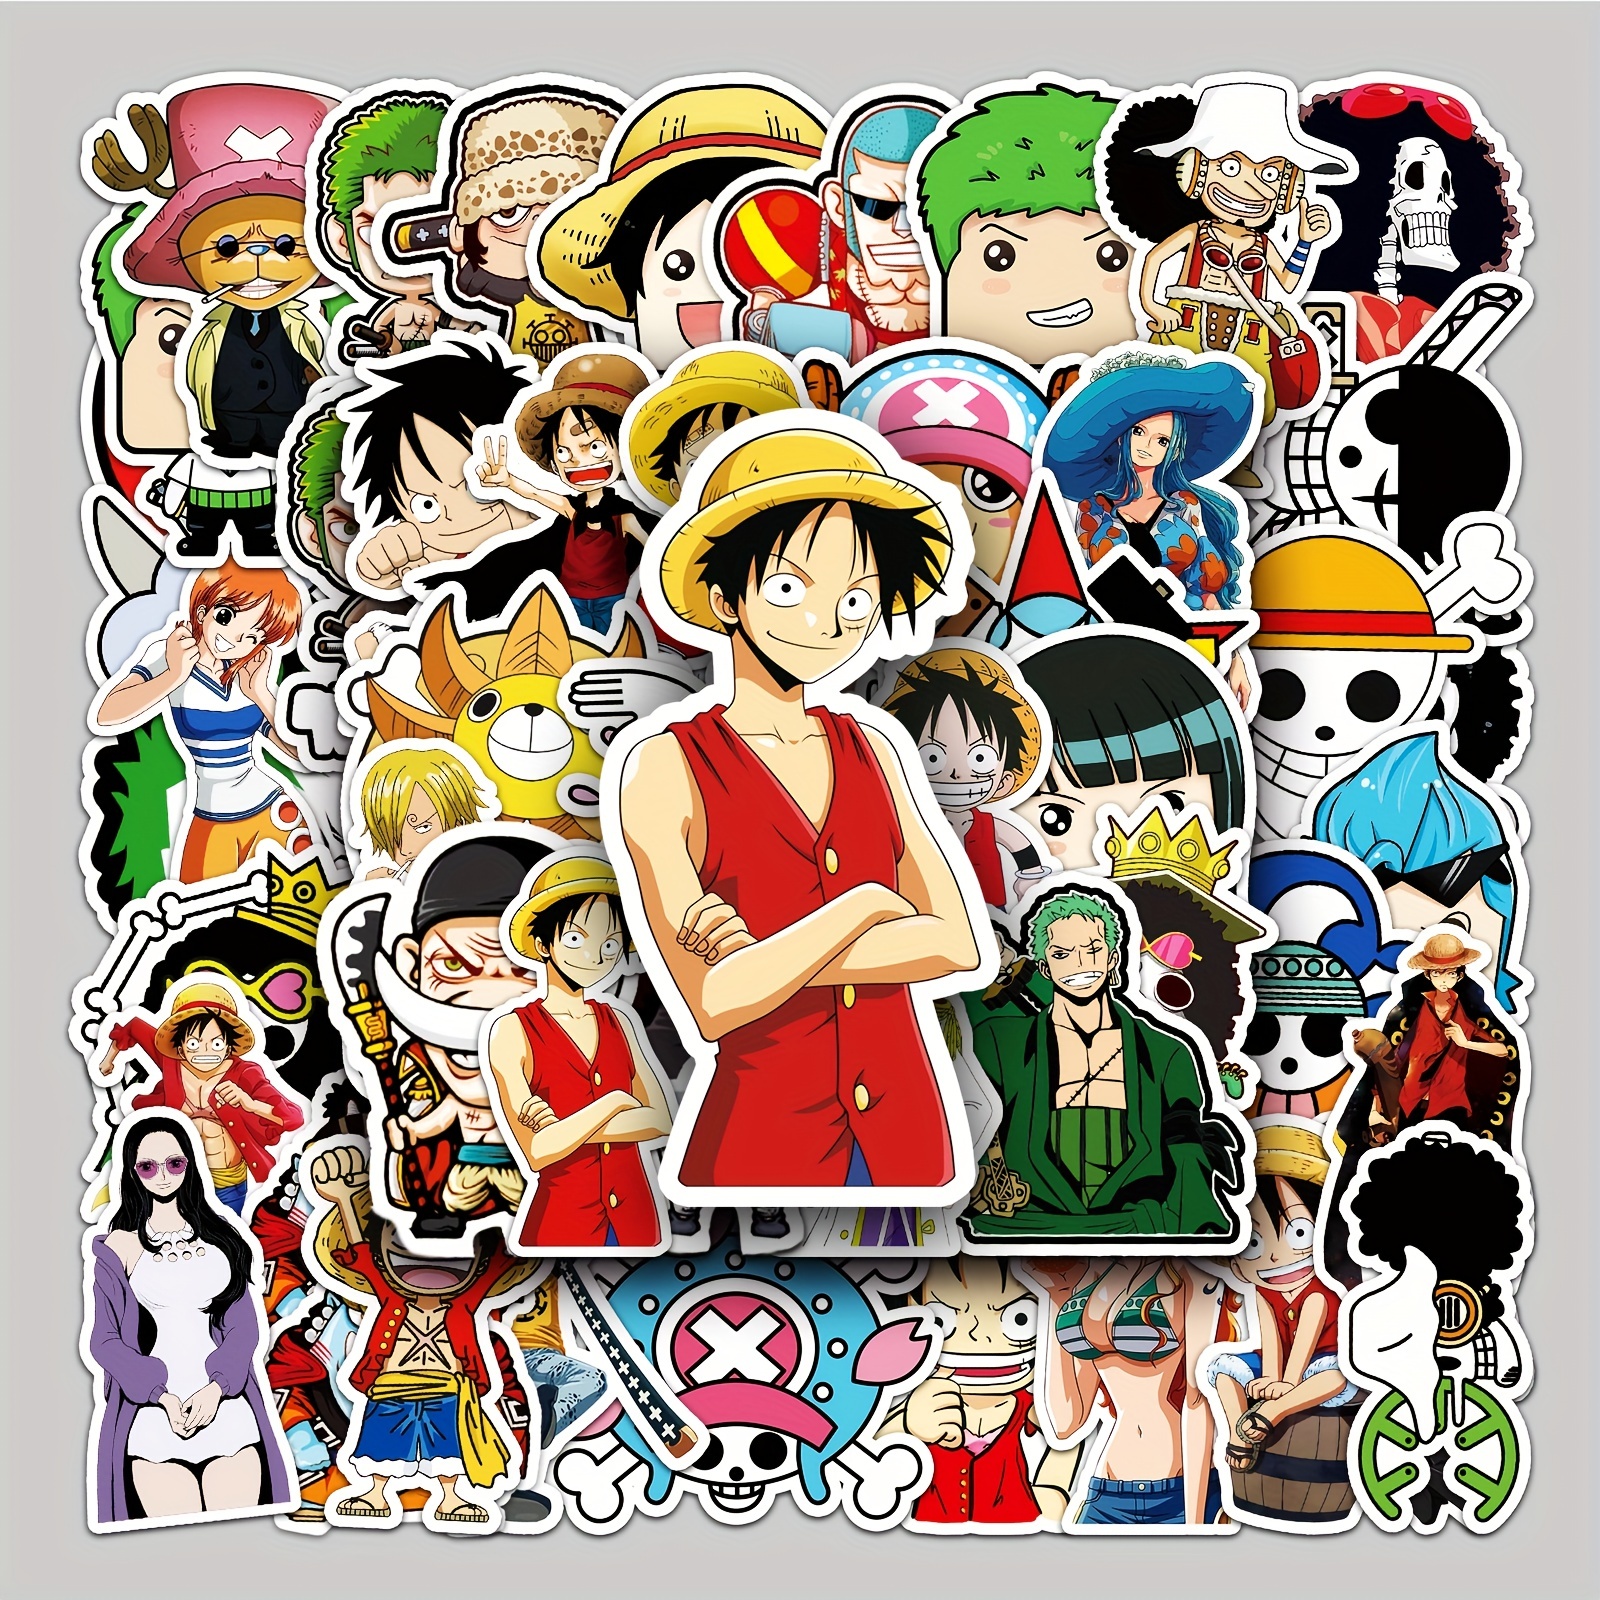 Cartoon Digimon Anime Clothing stickers DIY patches for children